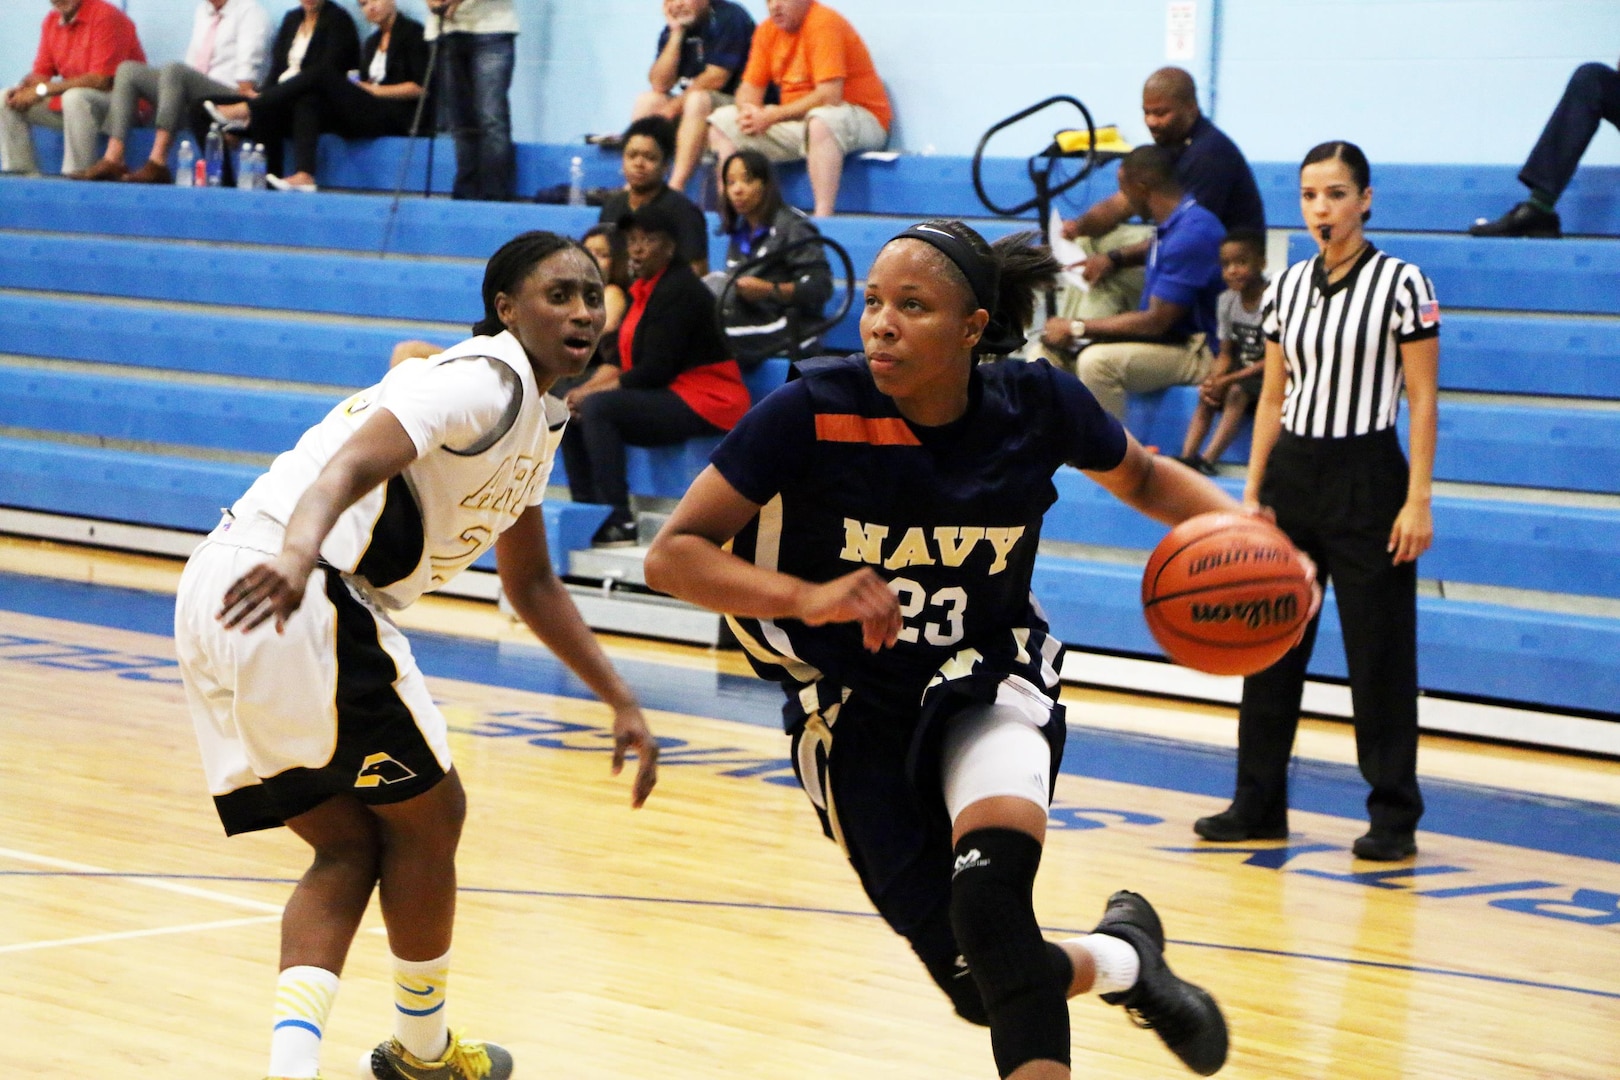 Navy Seaman Jameika Hoskins (#23) of USS Rushmore drives the lane in their opening game against Armyduring the 2016 Armed Forces Women's Basketball Championship at Joint Base San Antonio-Lackland AFB, Texas on 1 July.  Army wins 90-68